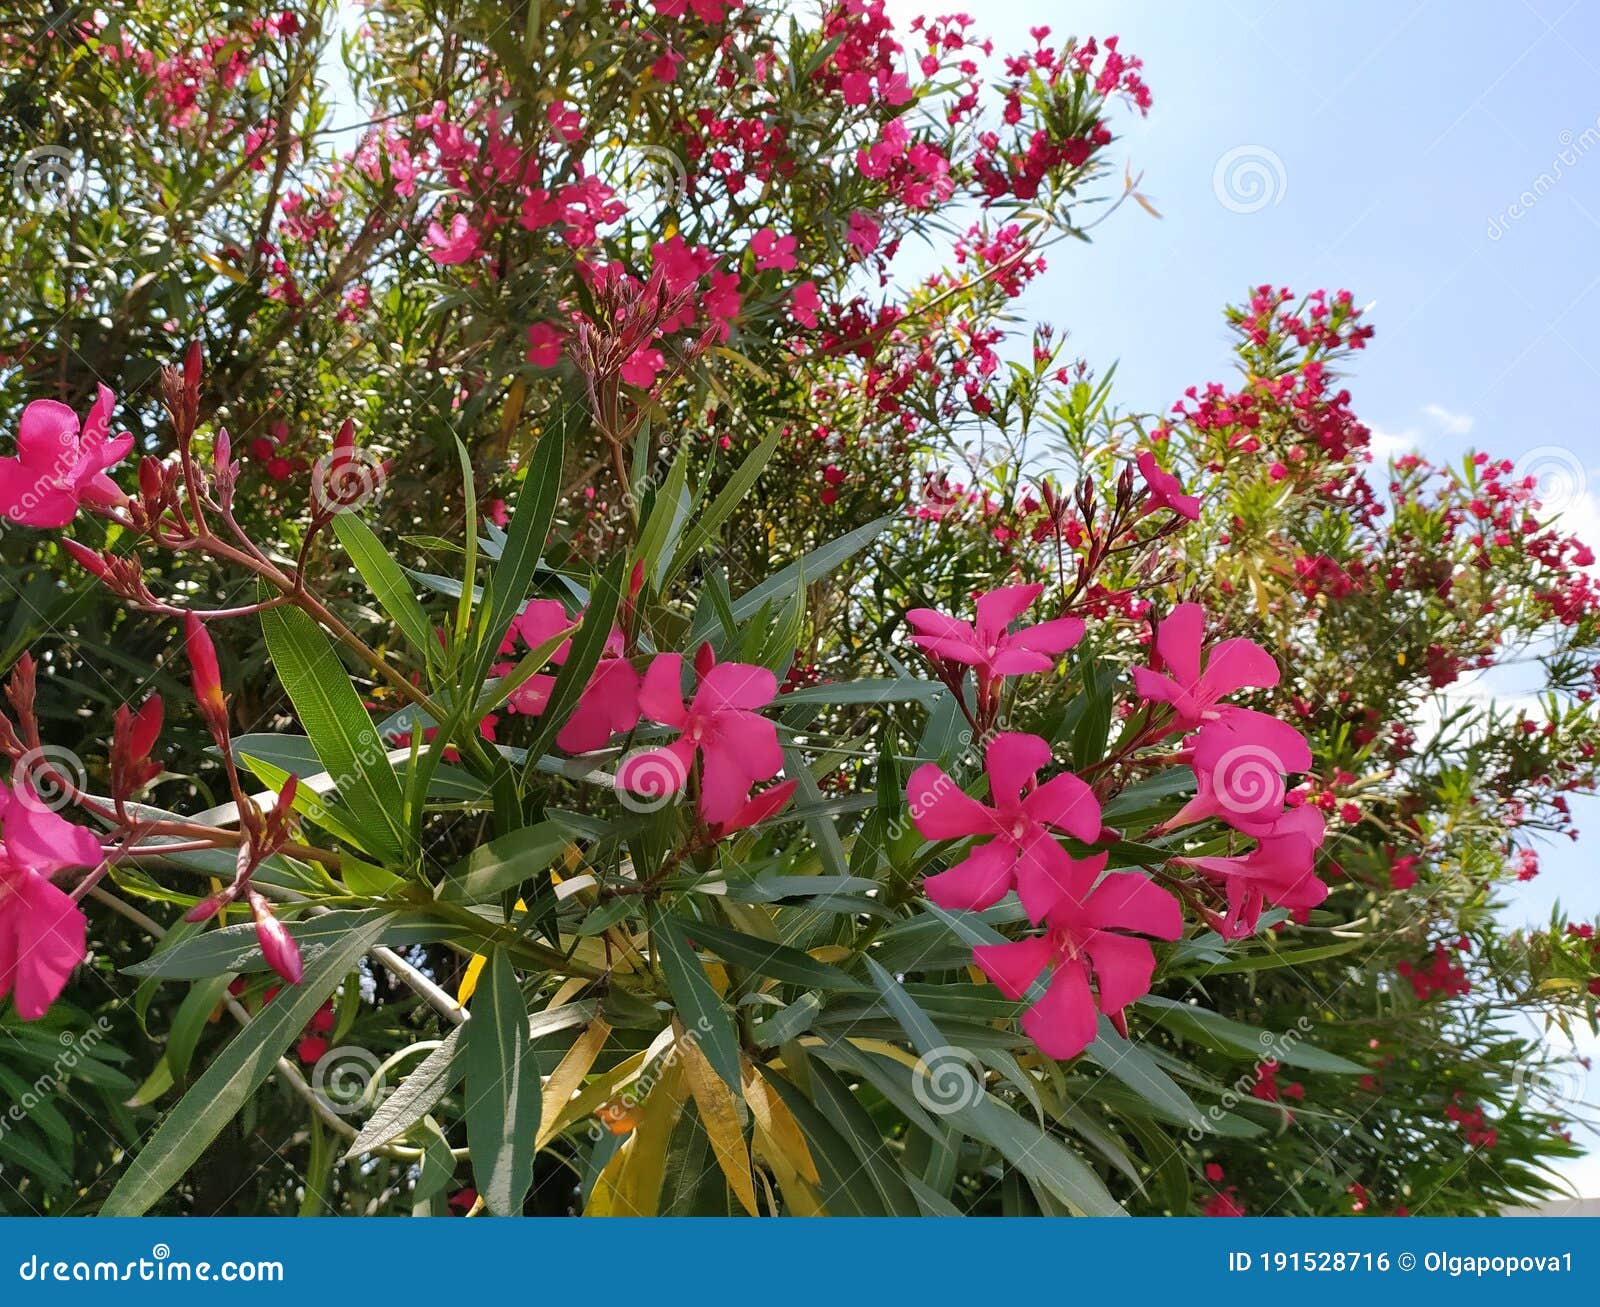 Hibiscus Syriacus Tree with Pink Flowers, Blossom. Stock Photo - Image ...